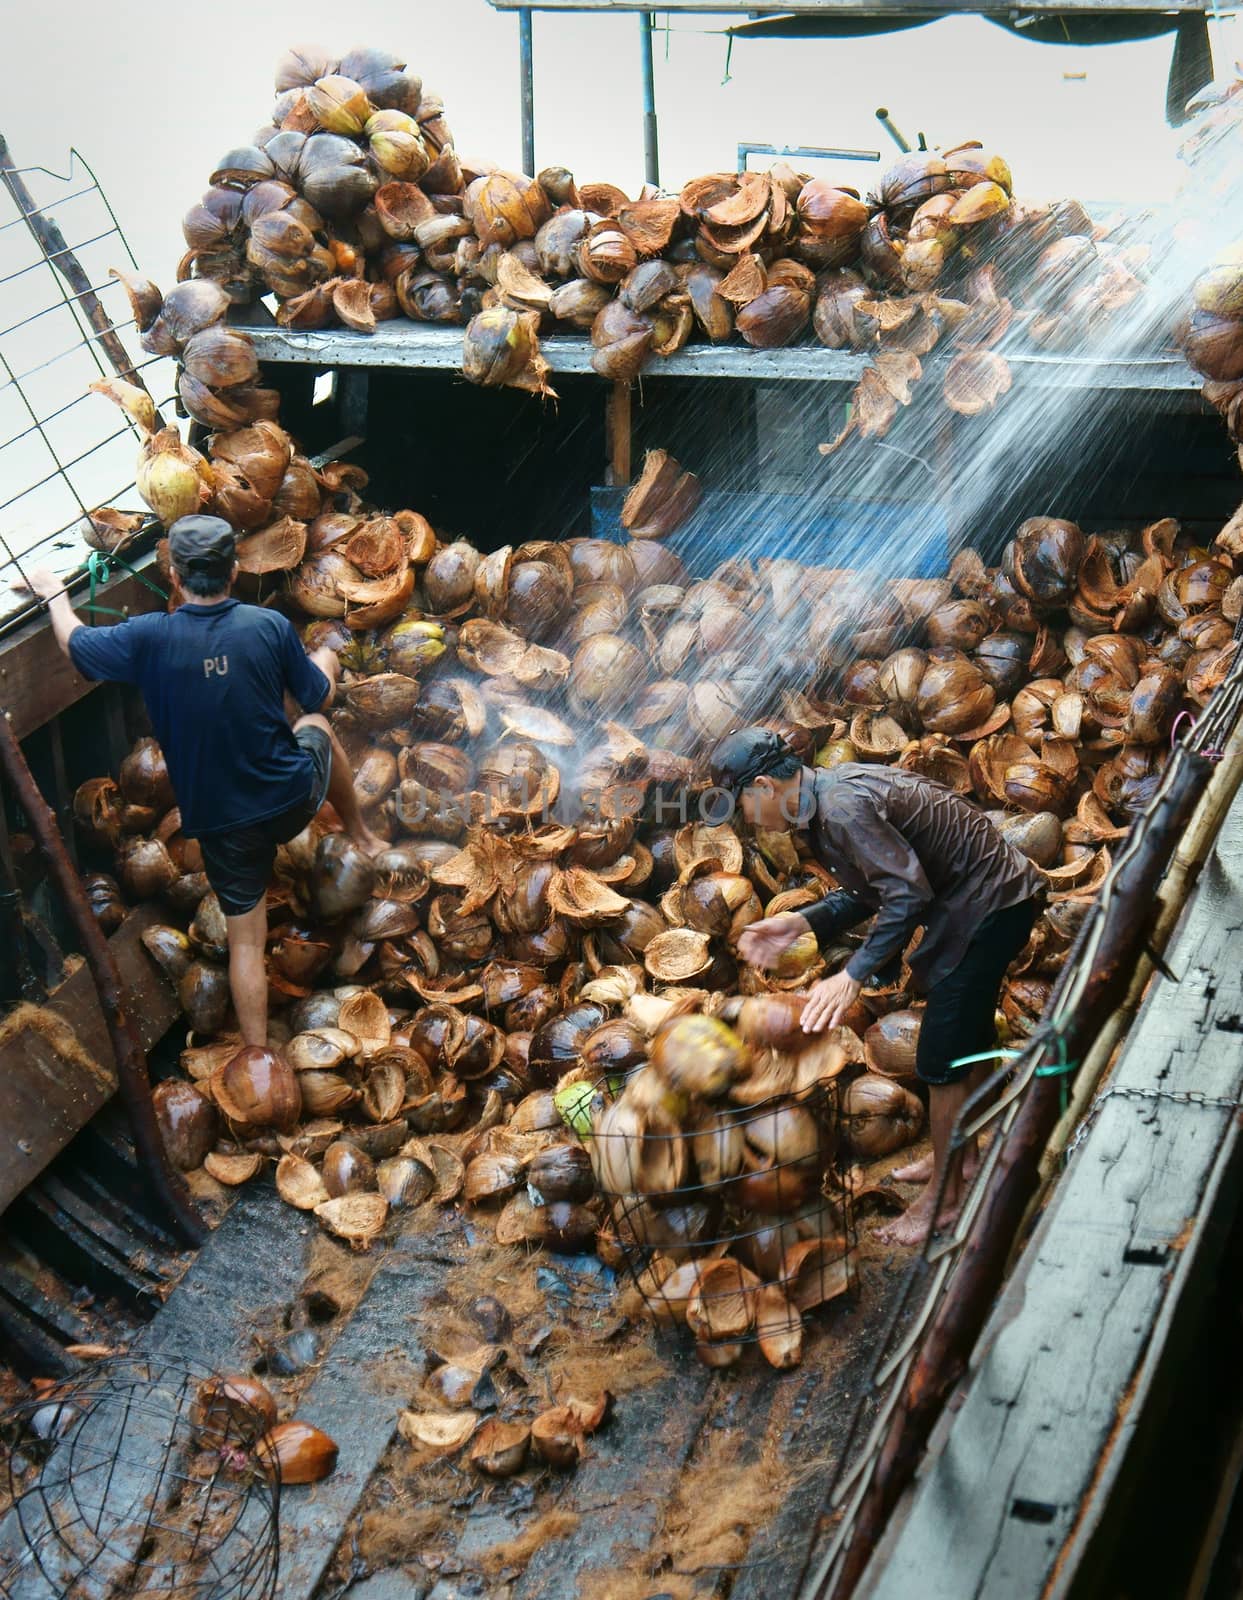 BEN TRE, VIET NAM- JUNE1: Asian worker work hard outdoor on day, Vietnamese man transfer material from coconut fiber industry, tradition product from coconut area, Mekong Delta, Vietnam, June 1, 2015